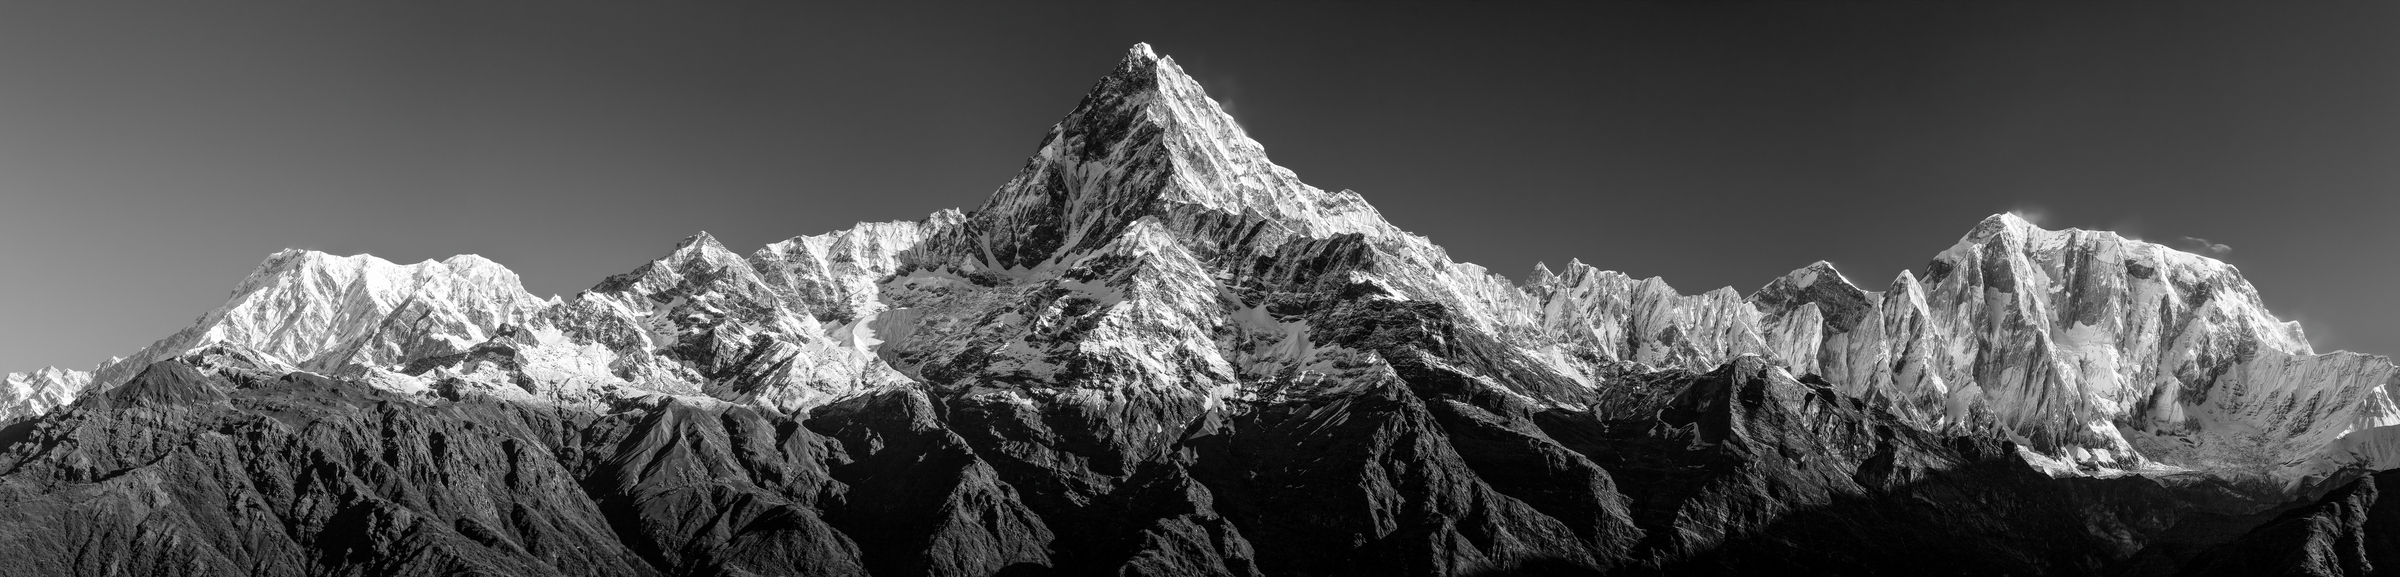 A very high resolution, large-format VAST photo of Machapuchare Mountain and the Annapurna Himalayas Mountains from Namchung Ri; fine art black and white landscape photograph created by Doug Kofsky while mountaineering in Nepal